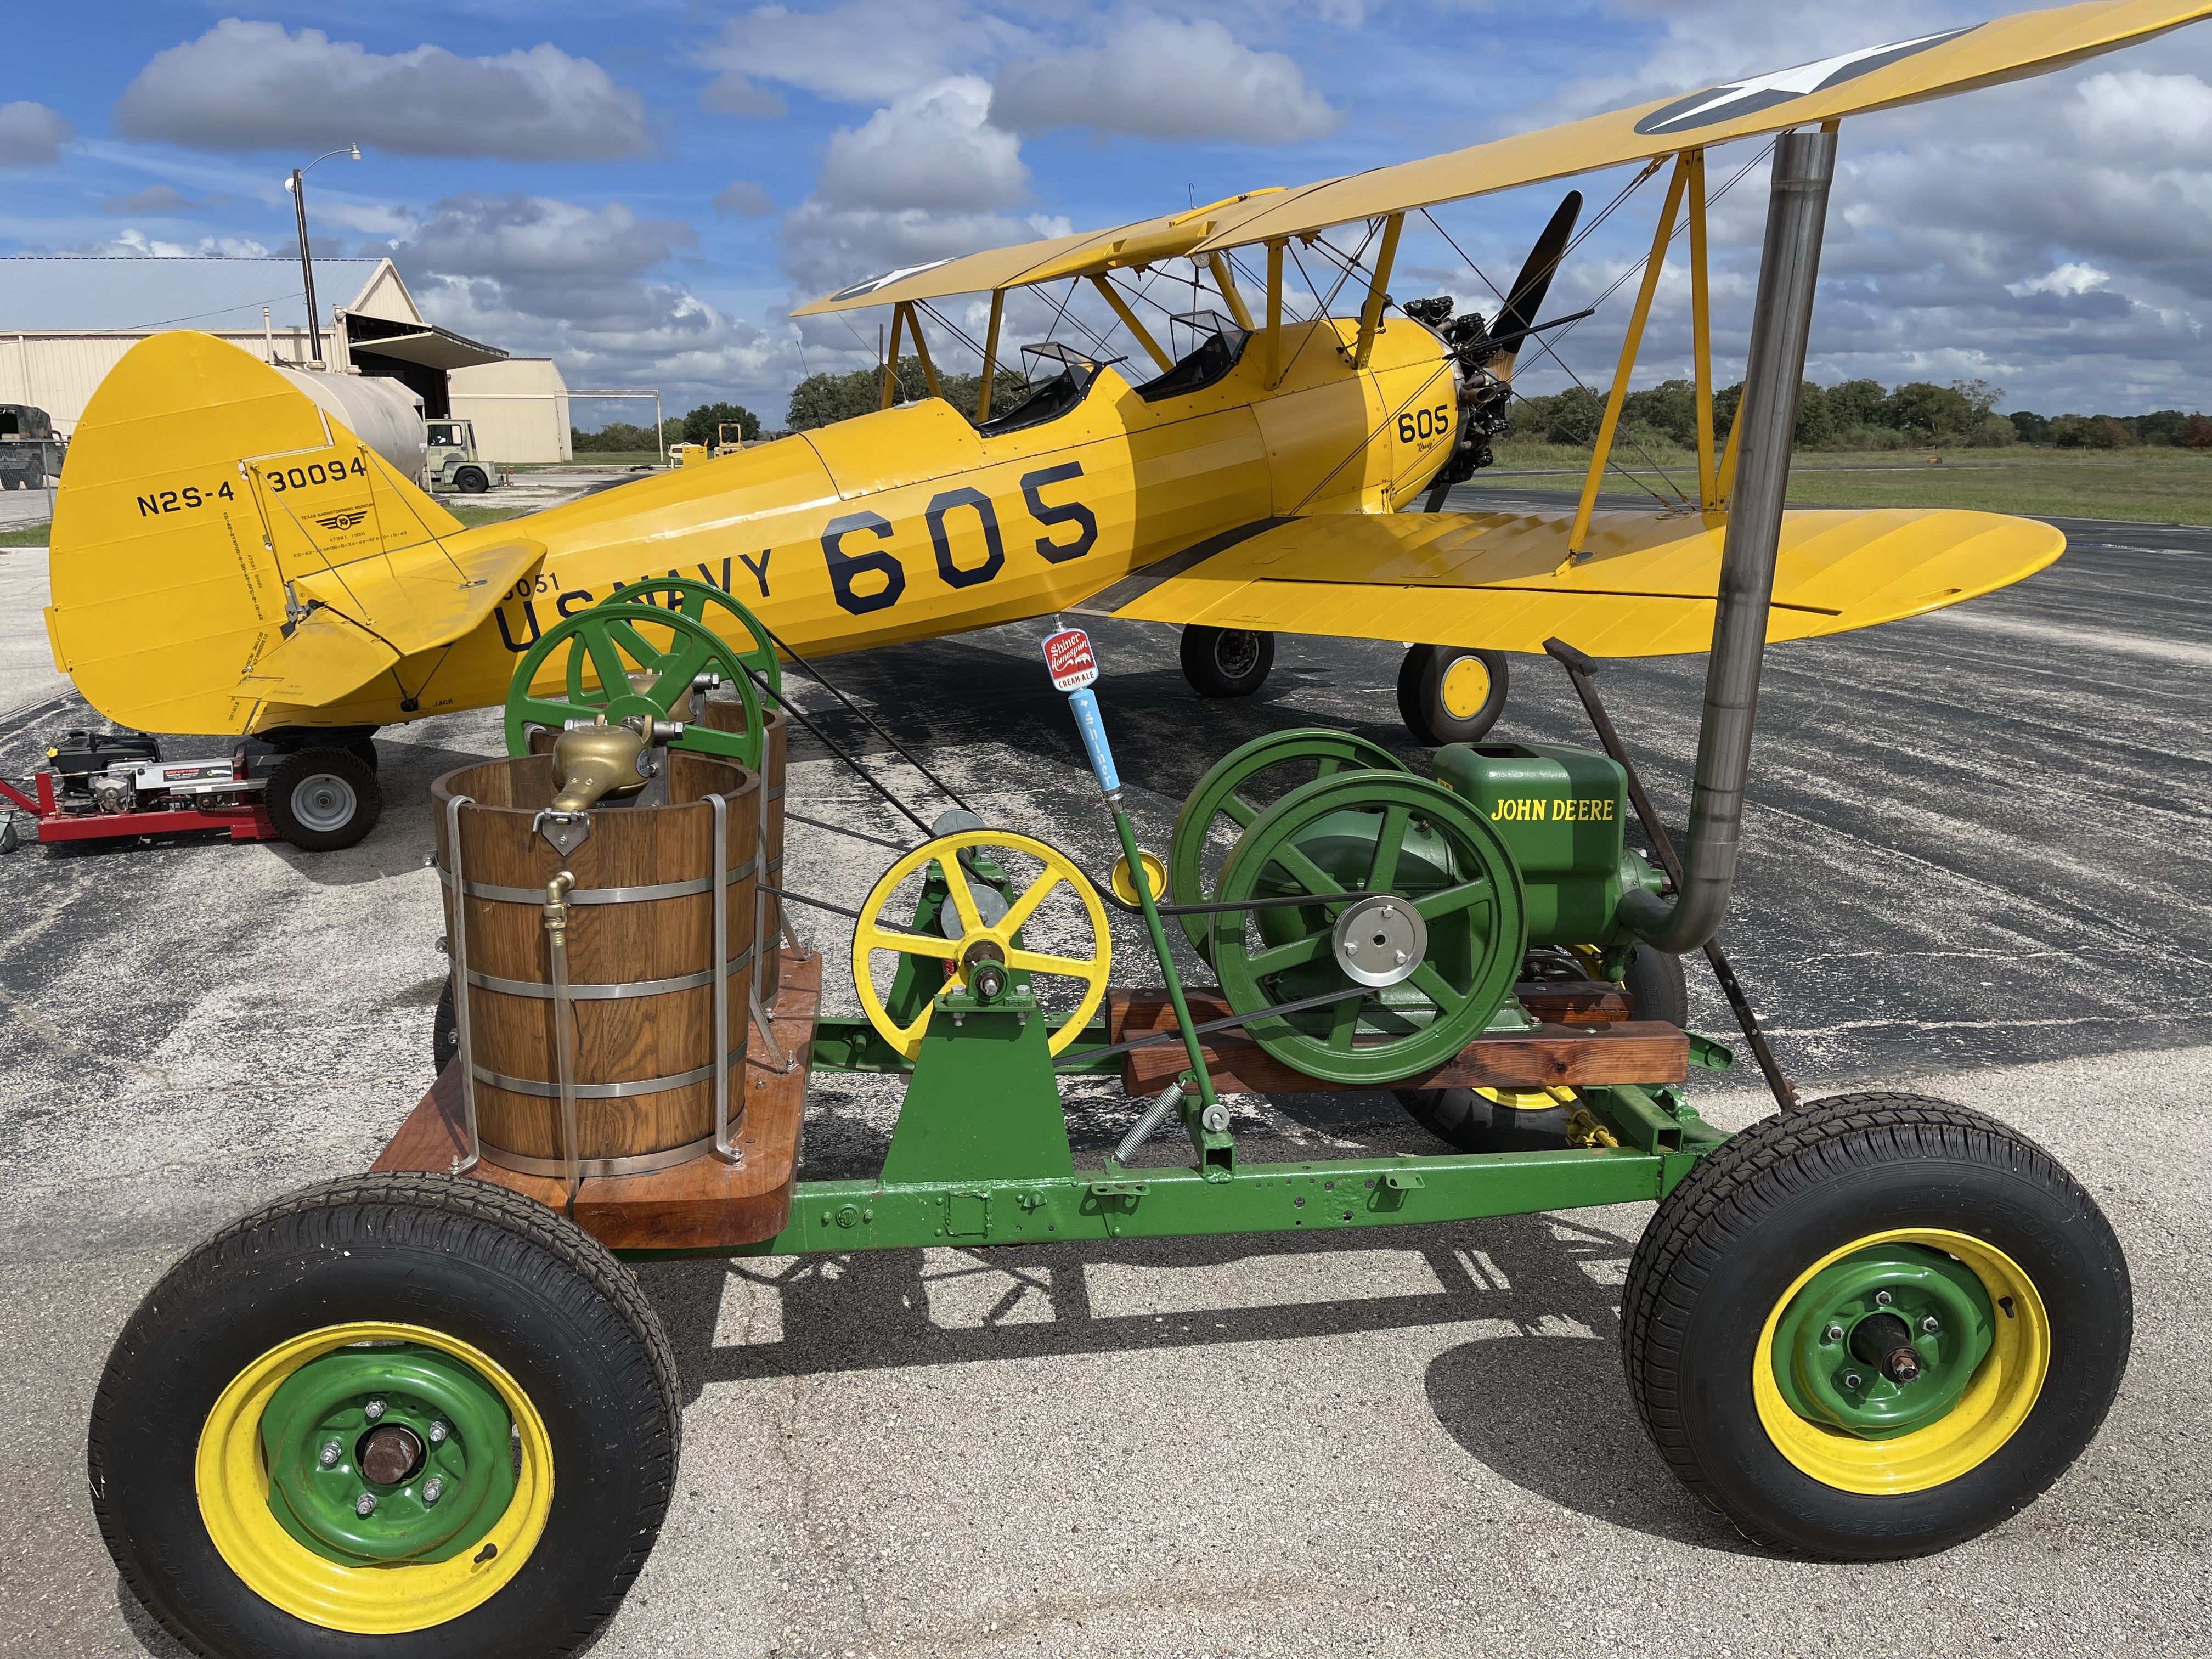 a green and yellow frame on wheels with an engine mounted on top sites on an airport runway.